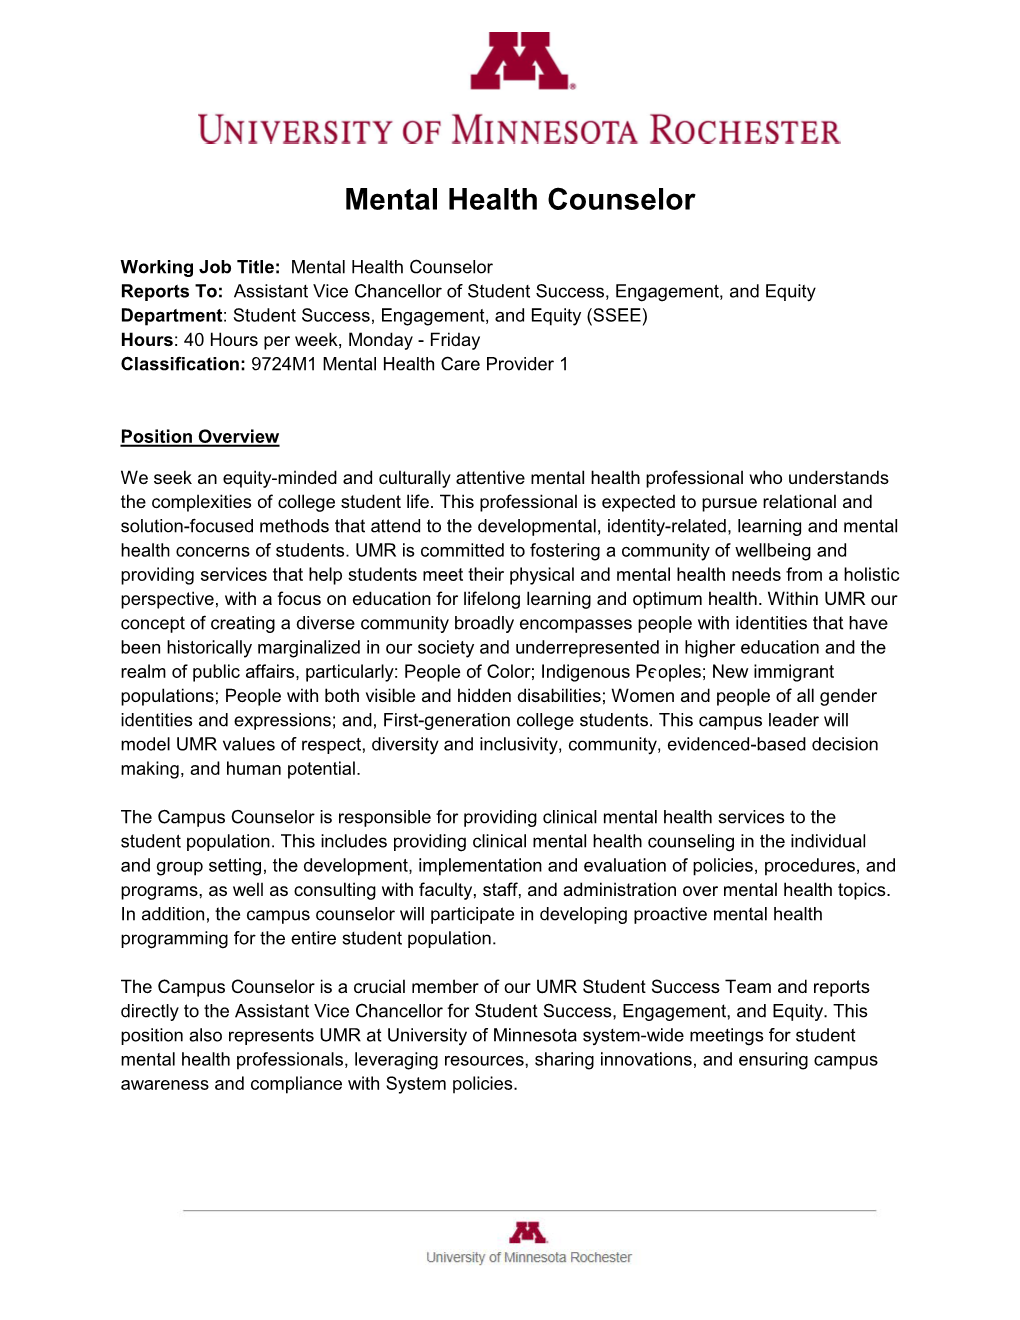 Mental Health Counselor